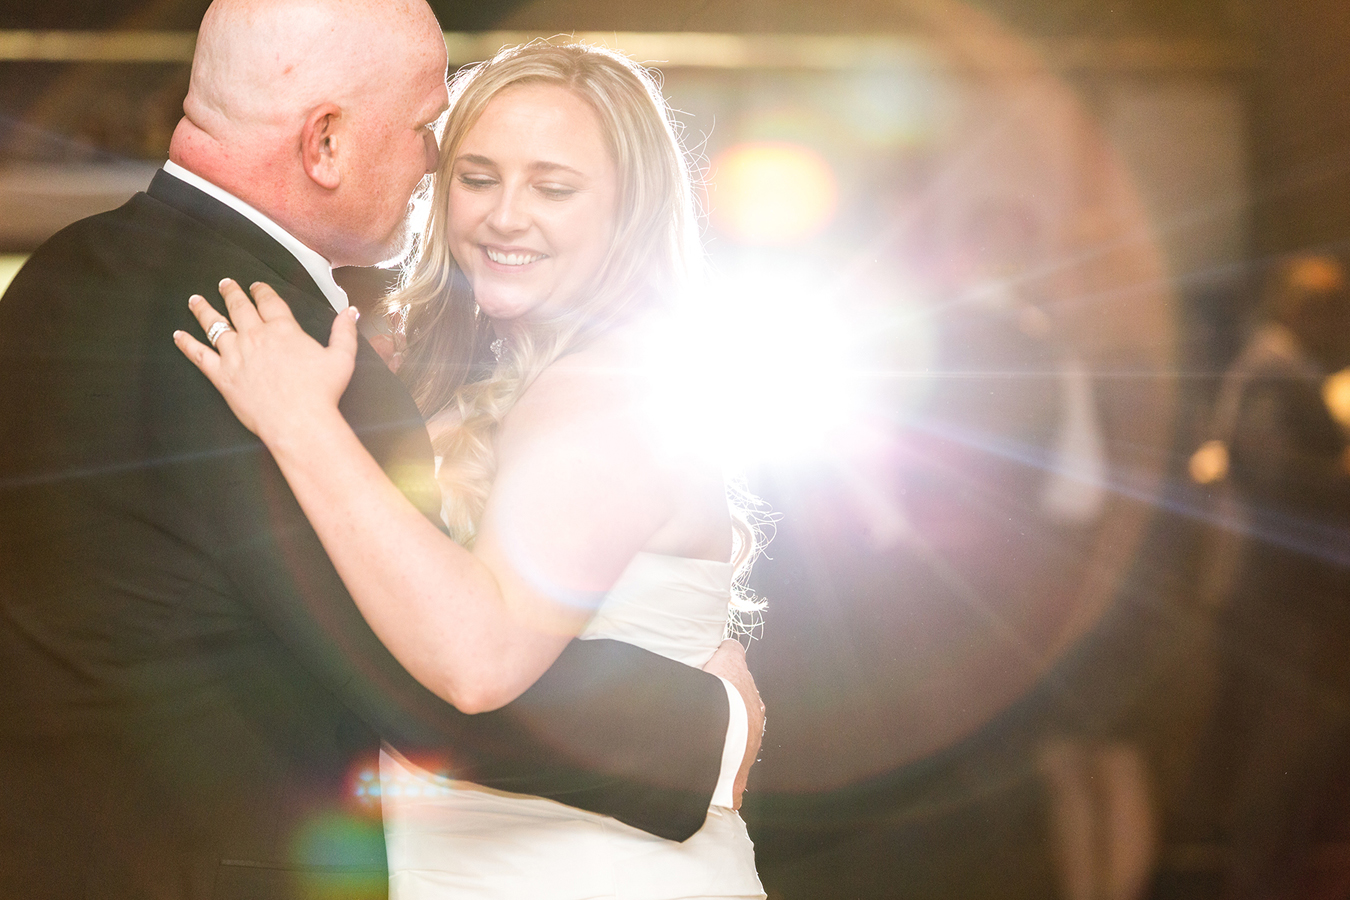 Candid wedding photographers in Vancouver